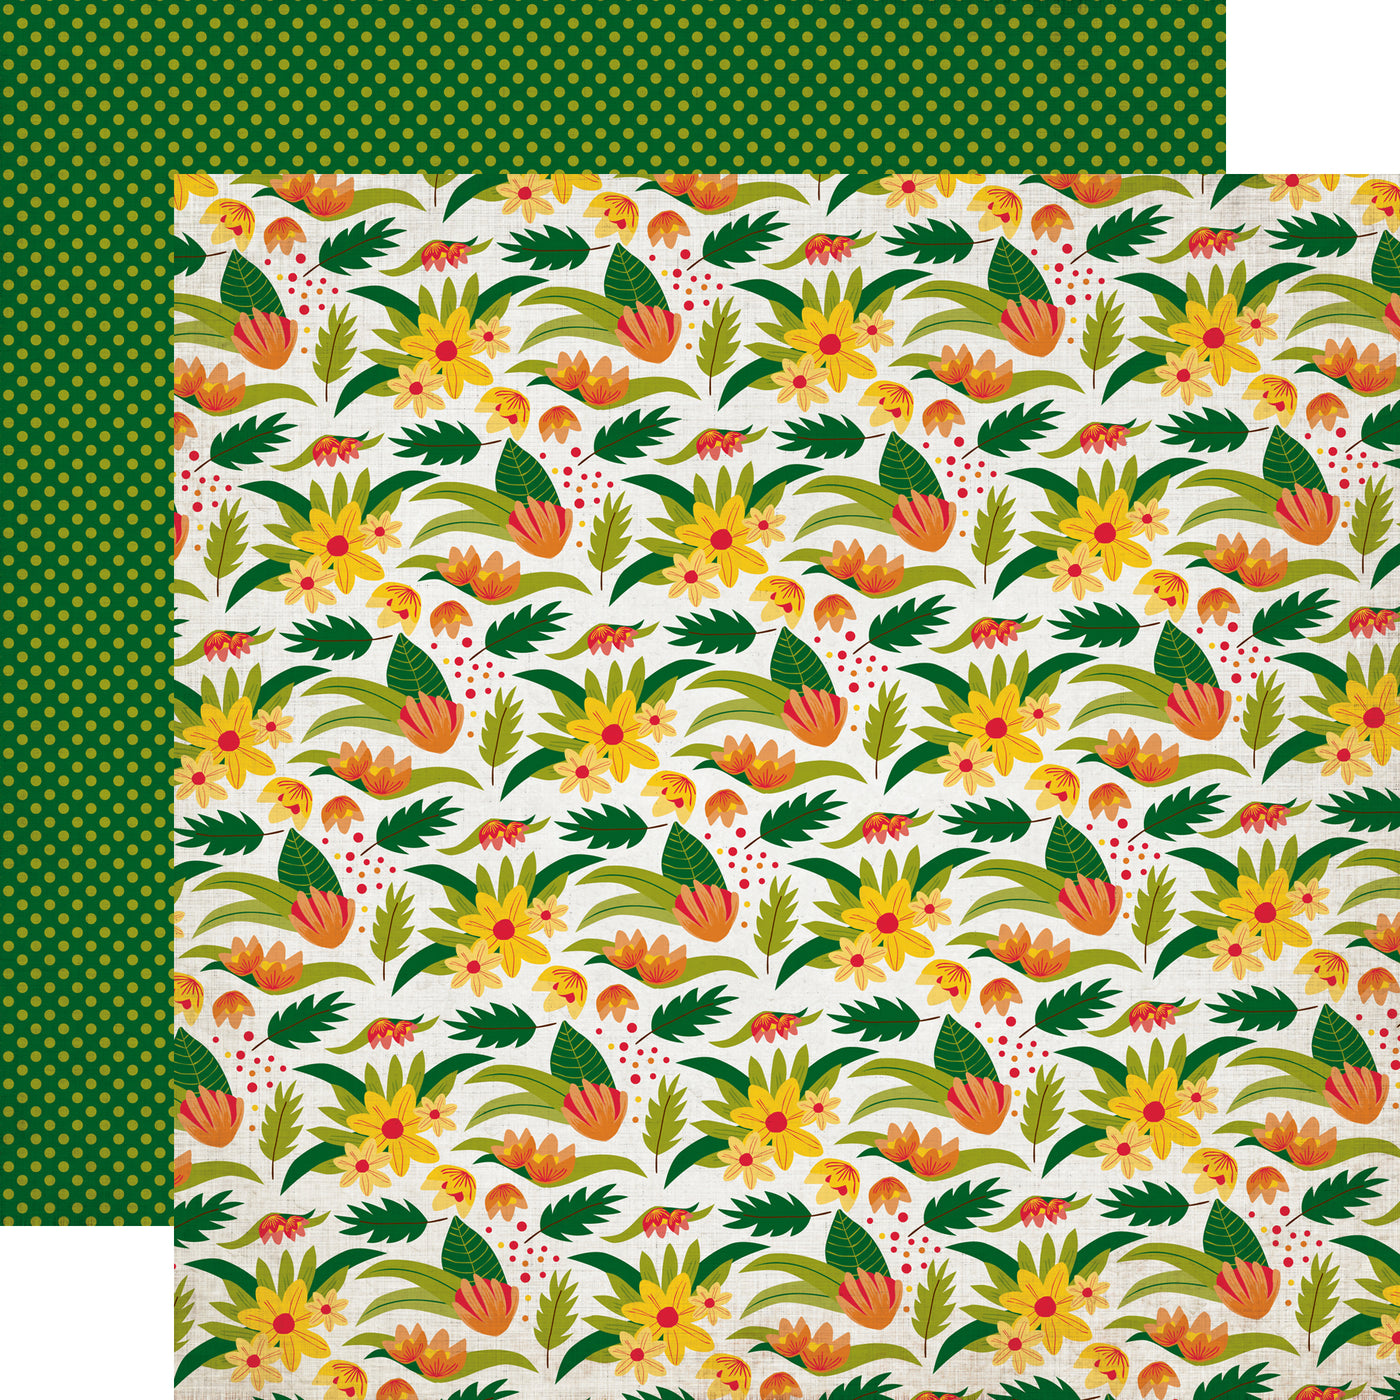 Wilderness Floral patterned cardstock (multi-colored yellow and orange flowers with red centers and green leaves on a white background with lime green polka dots on green reverse)